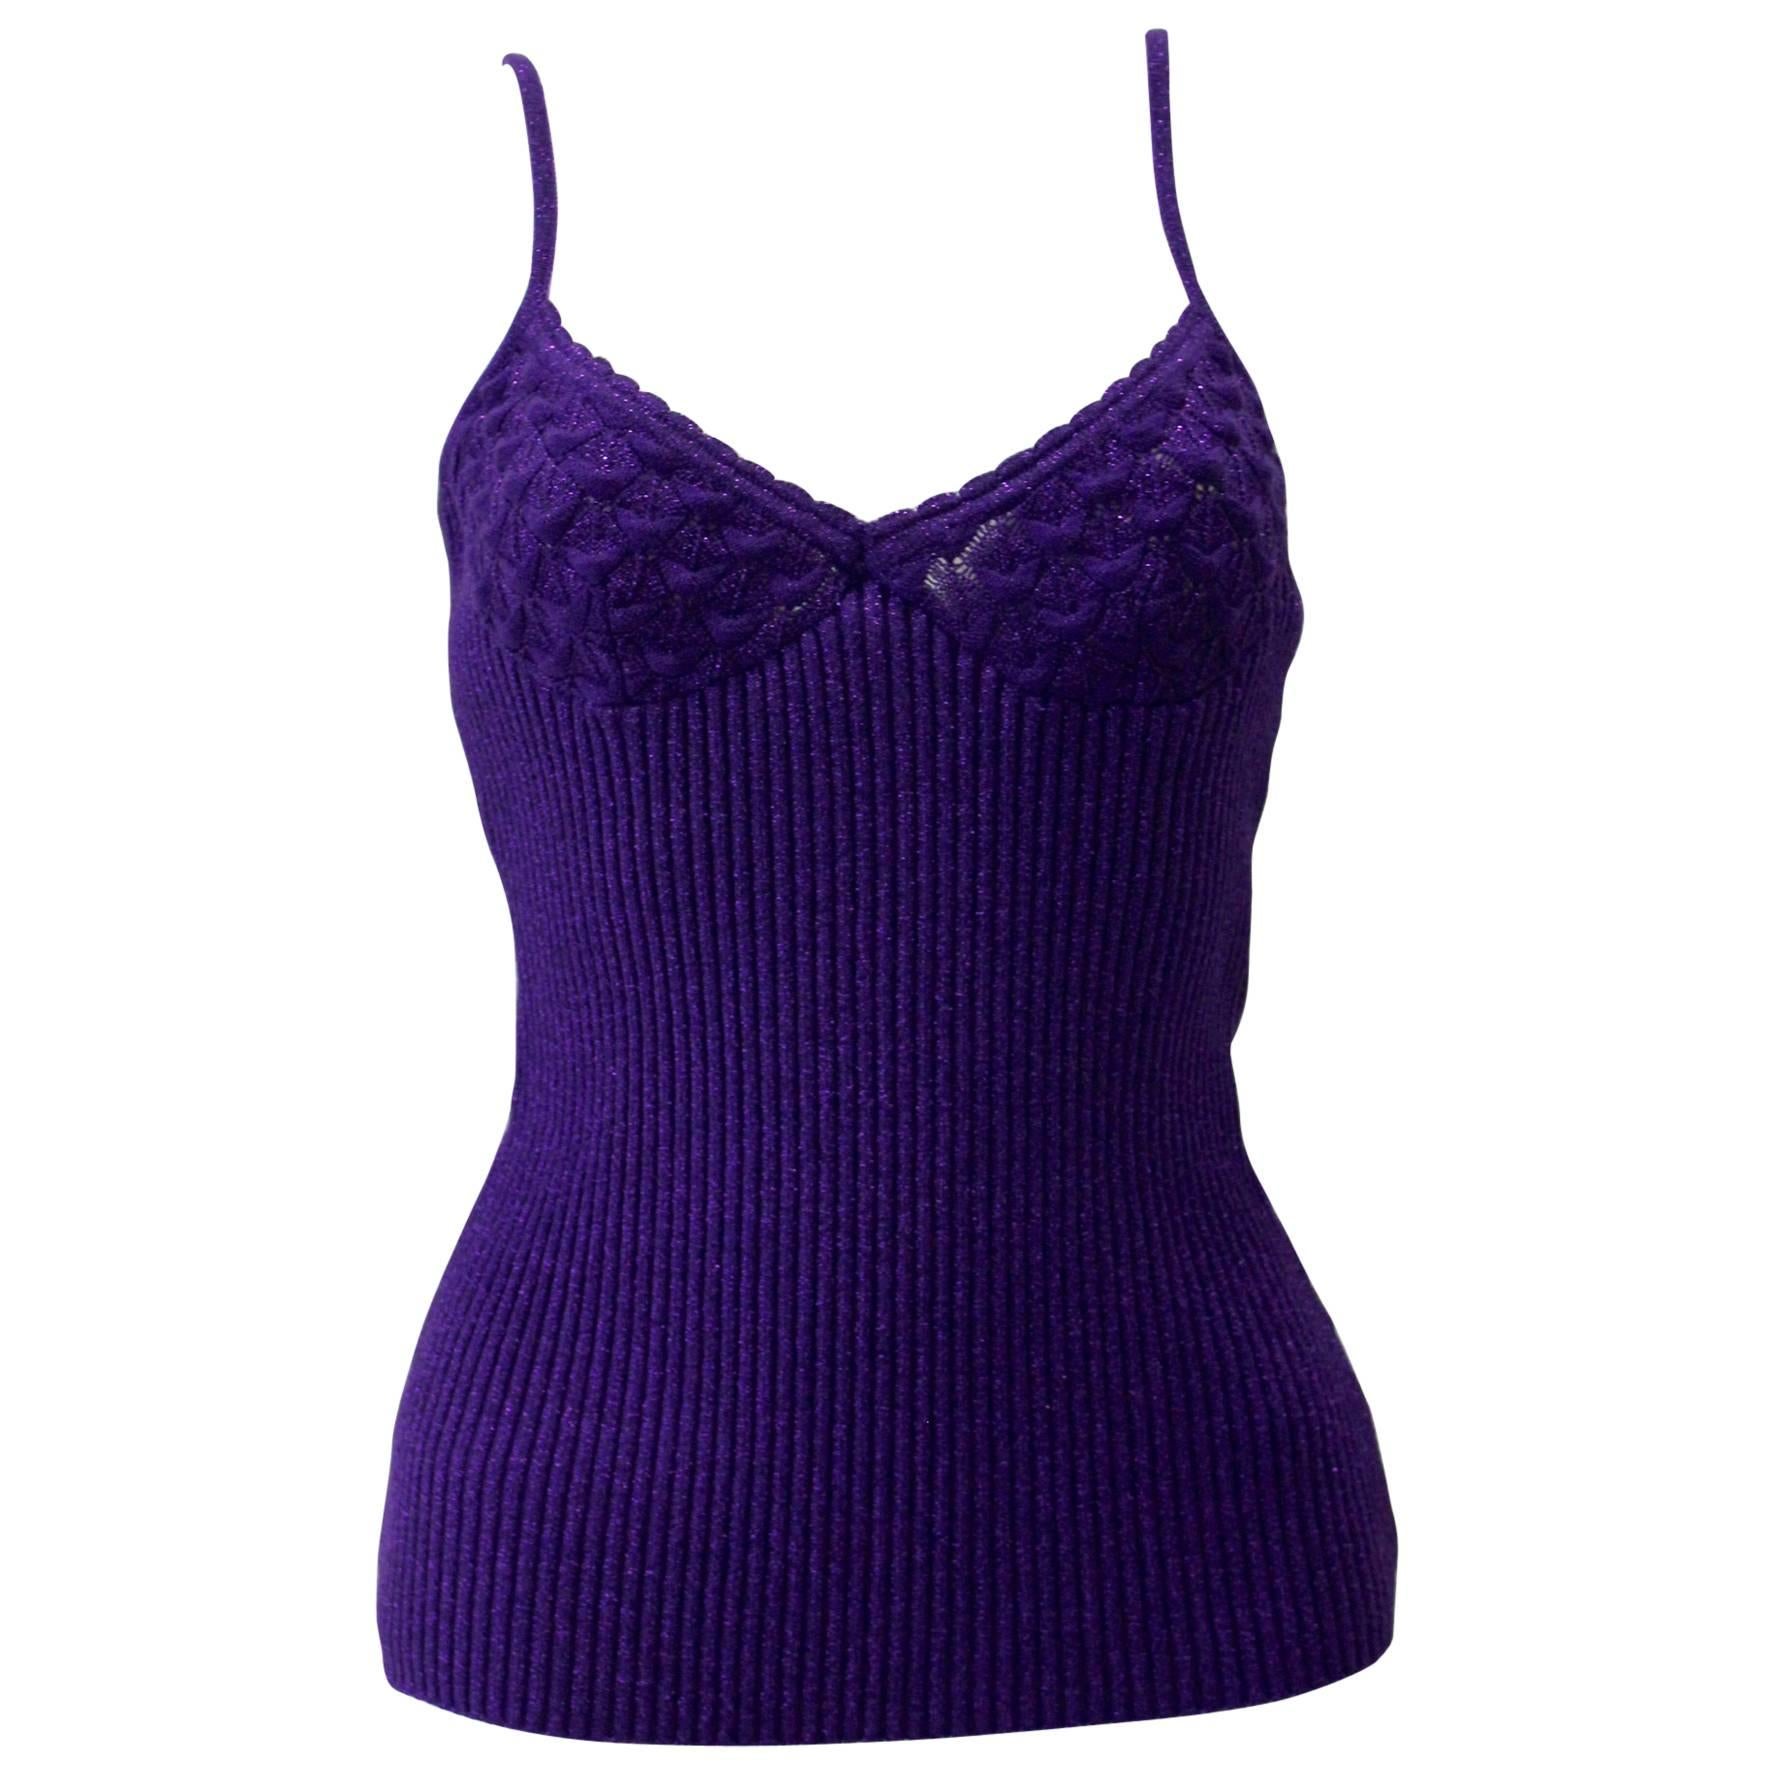 Gianni Versace Couture Lurex Knit Camisole Fall 1997 For Sale